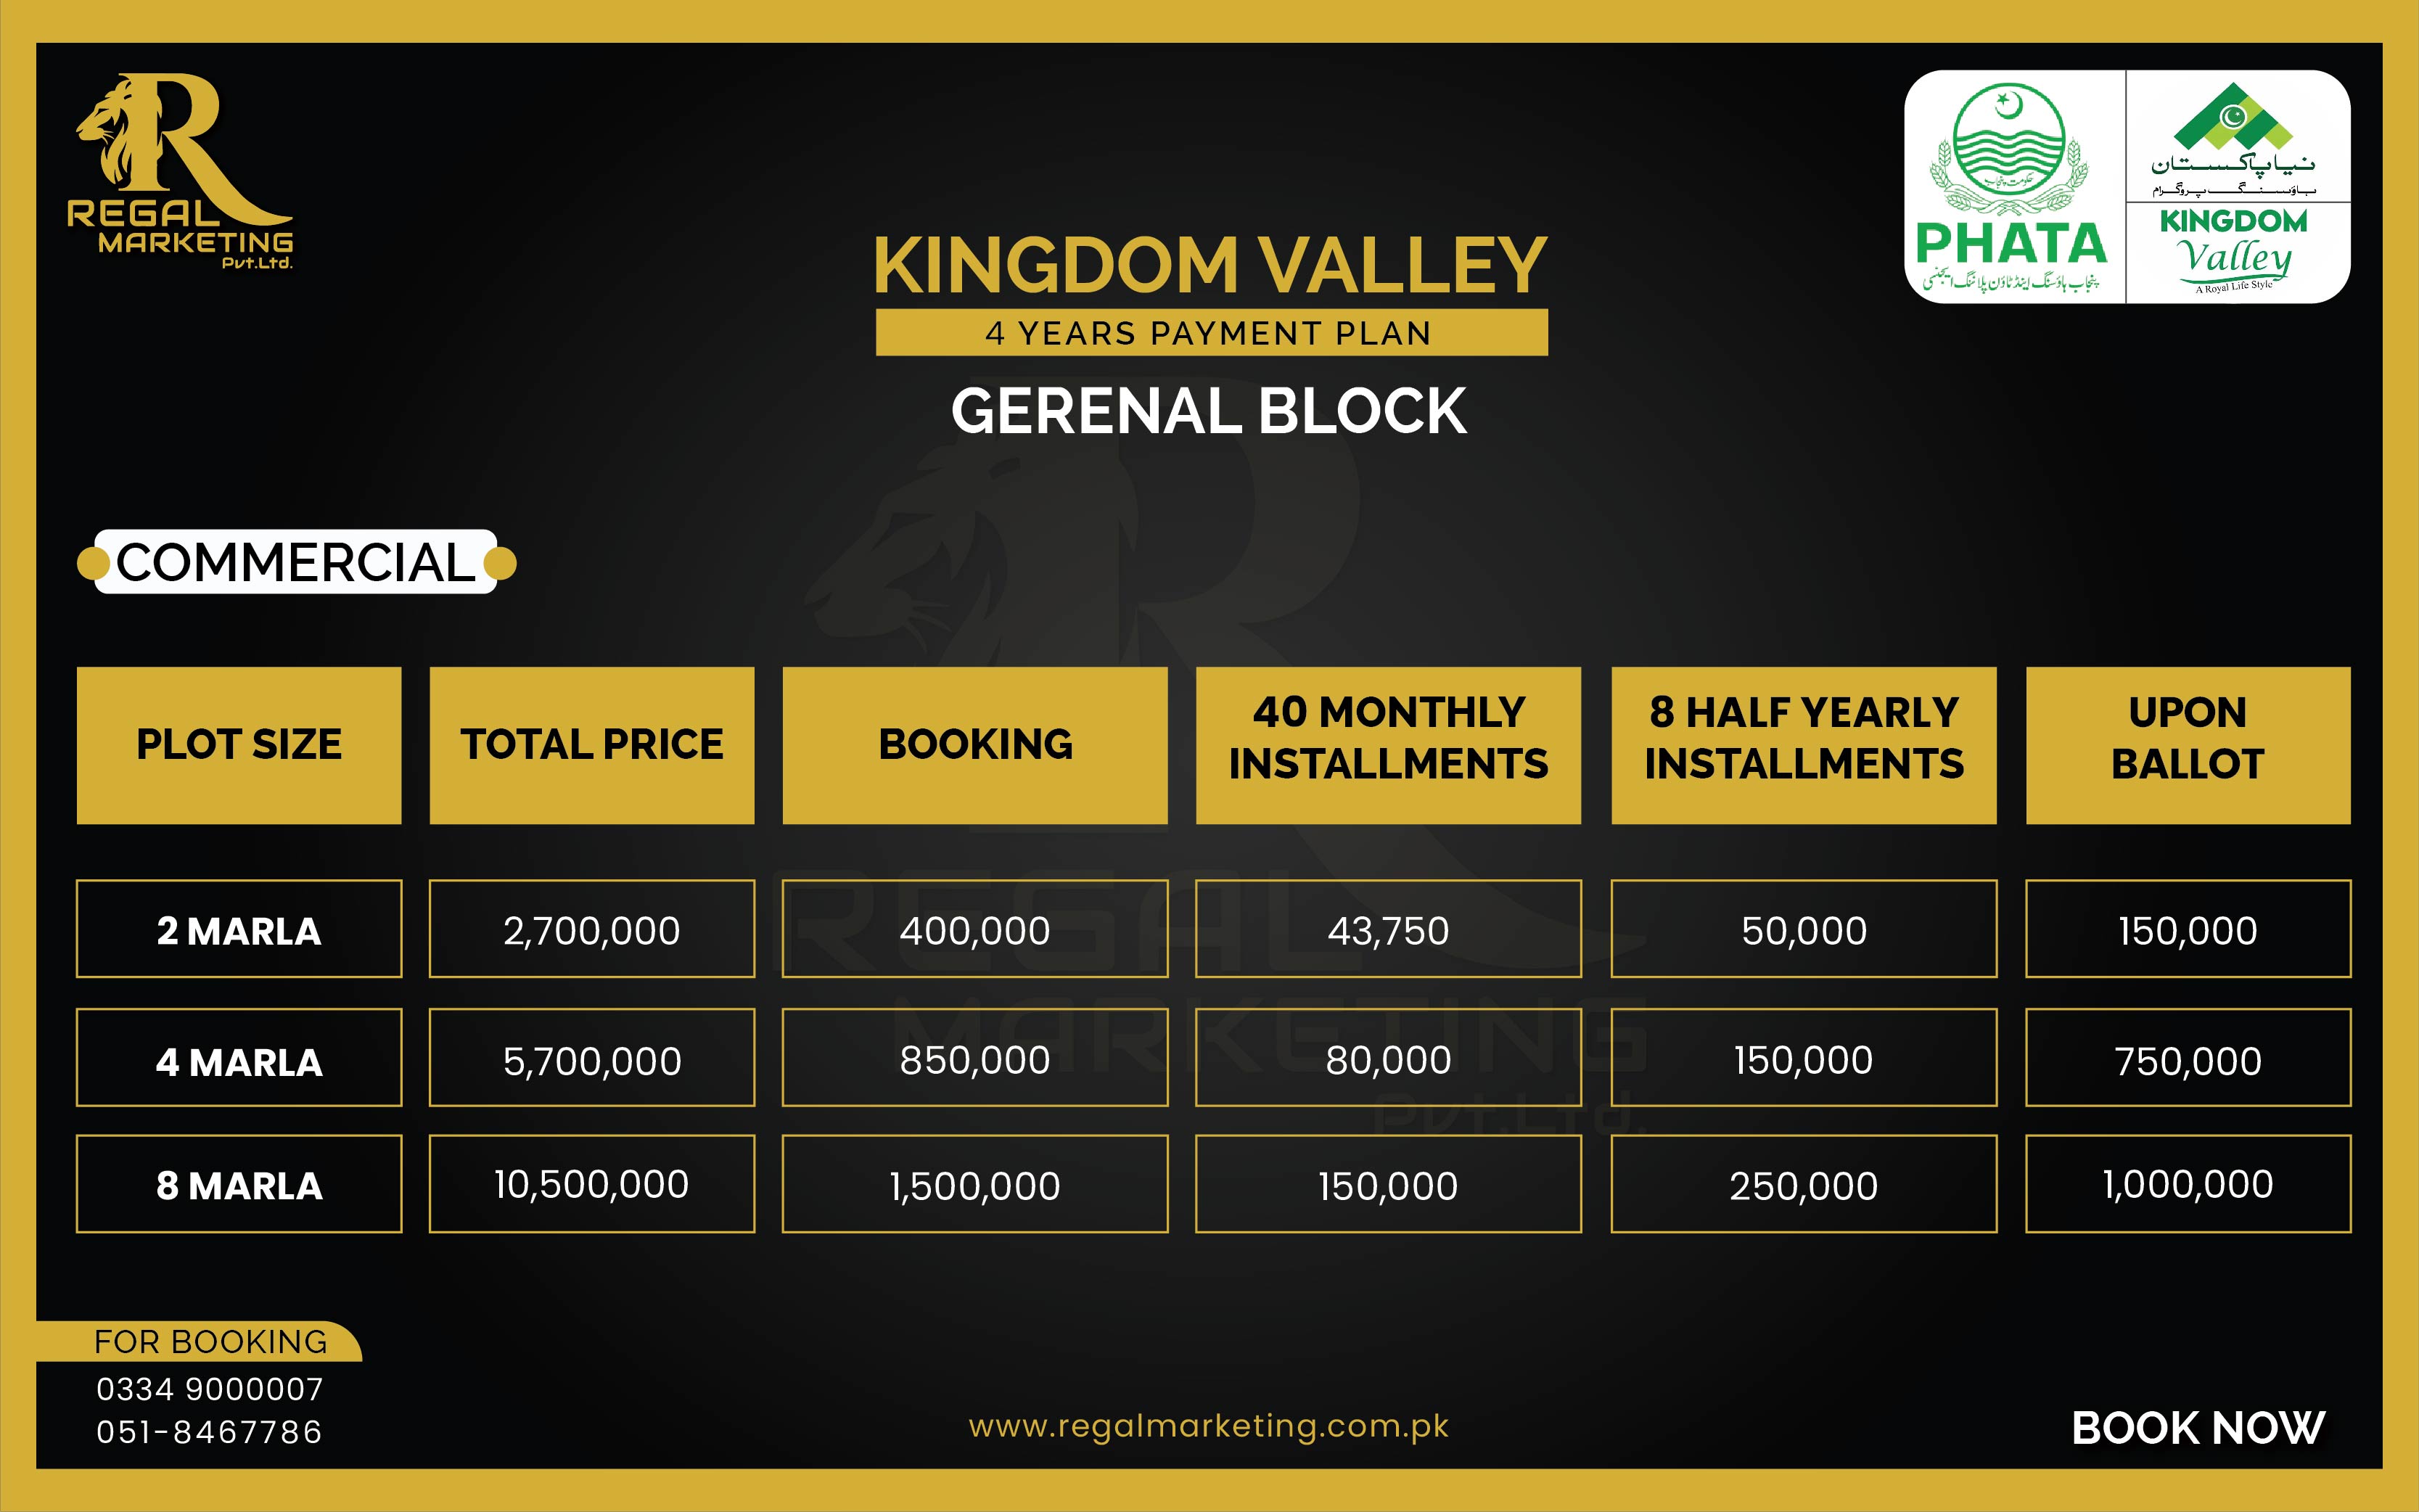 kingdom valley Islamabad general block commercial payment plan